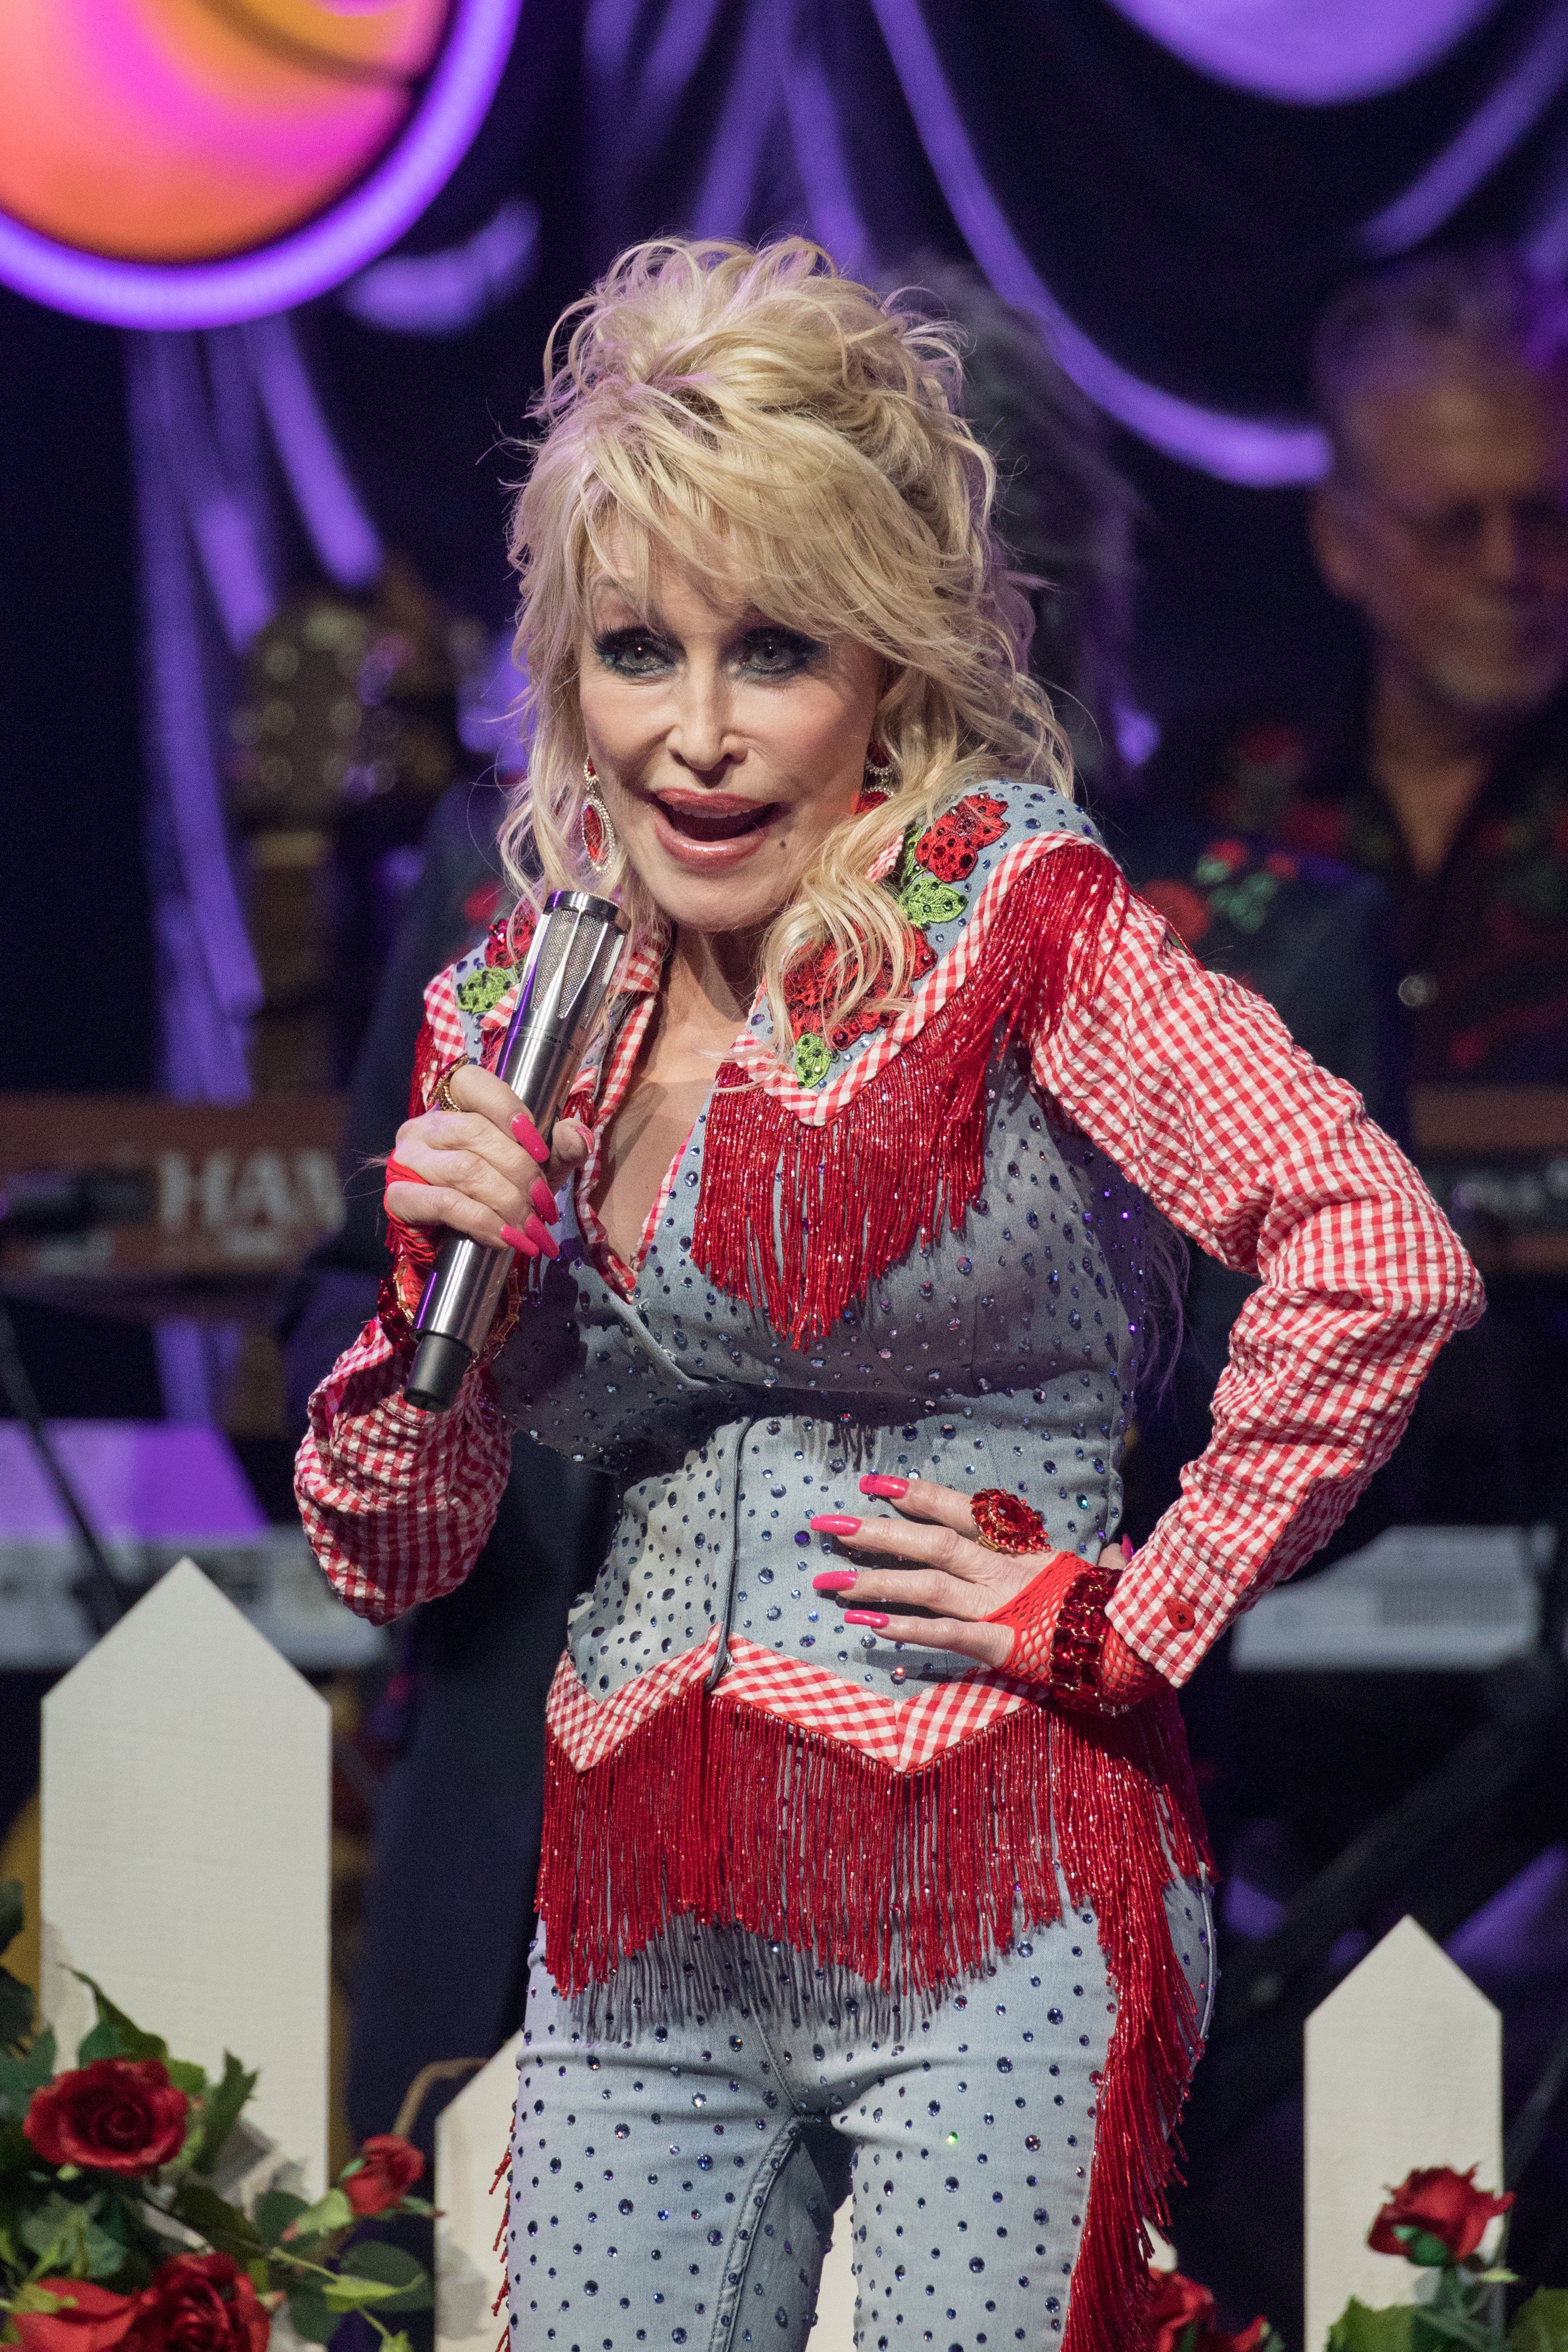 Singer-songwriter Dolly Parton performs onstage at "Dollyverse Powered By Blockchain Creative Labs on Eluv.io" during the 2022 SXSW Conference And Festival at ACL Live at The Moody Theater on March 18, 2022 in Austin, Texas. | Source: Getty Images